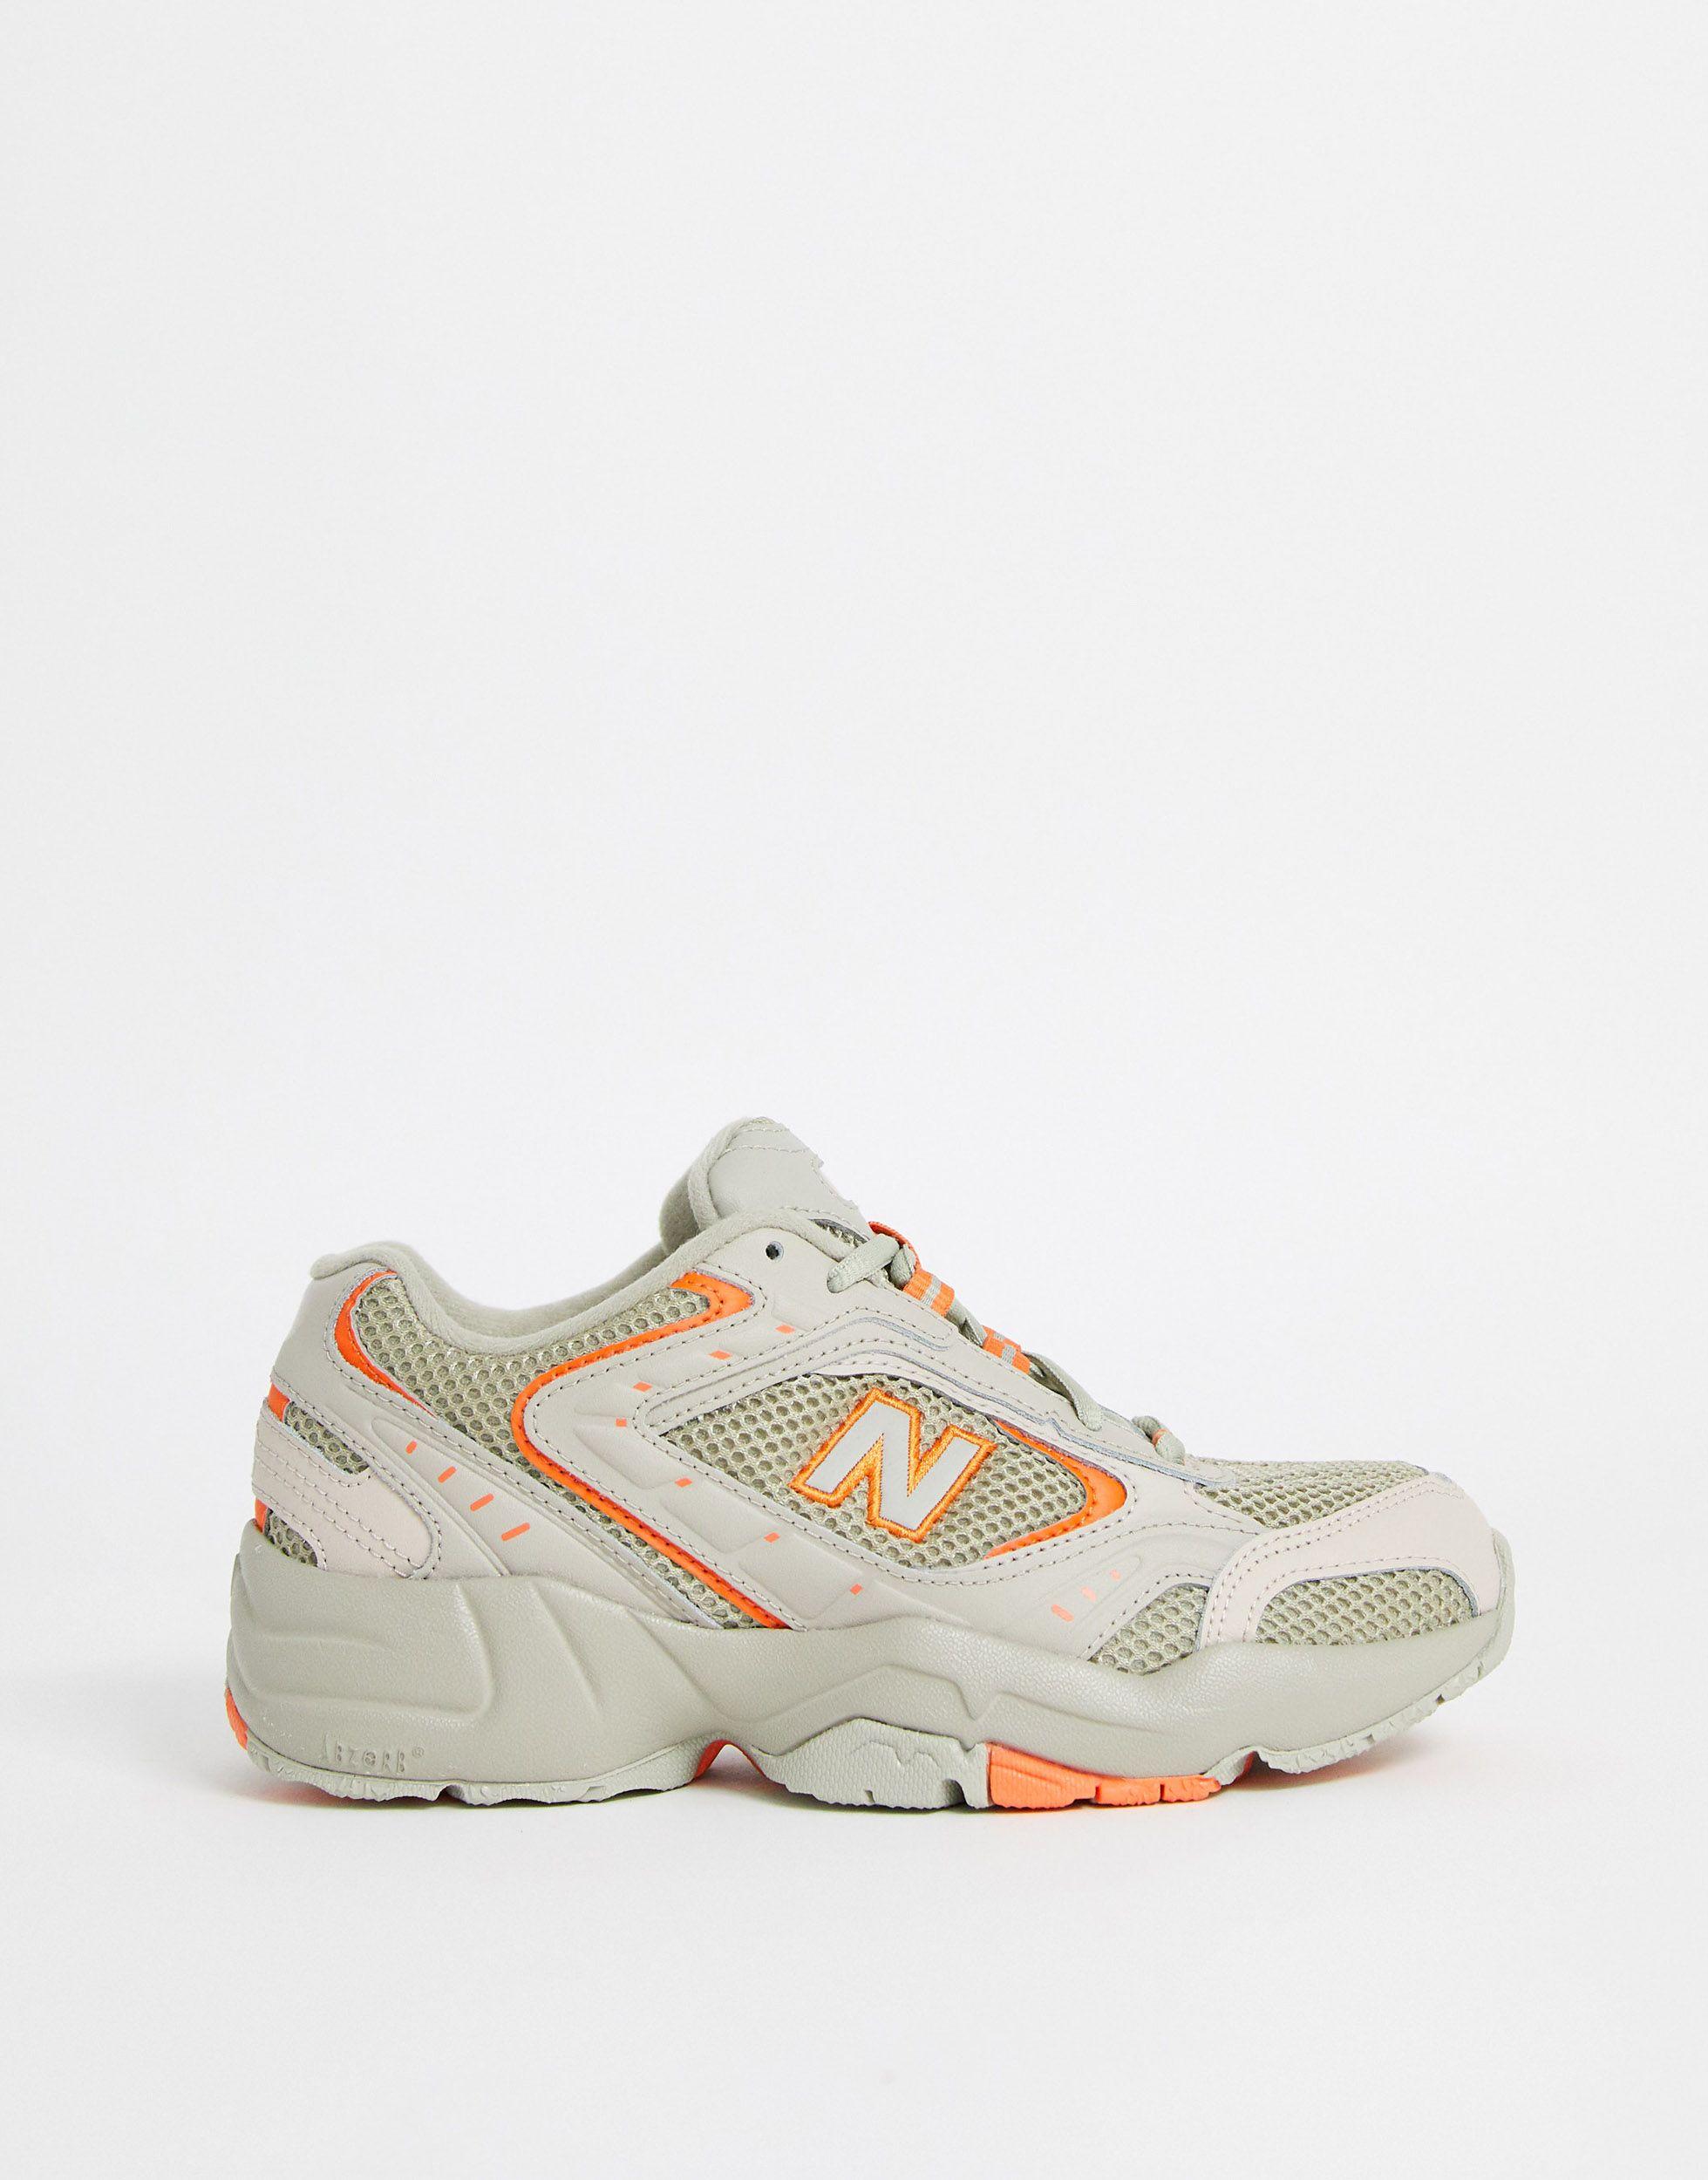 New Balance Utility Pack 452 Trainers in Gray - Lyst